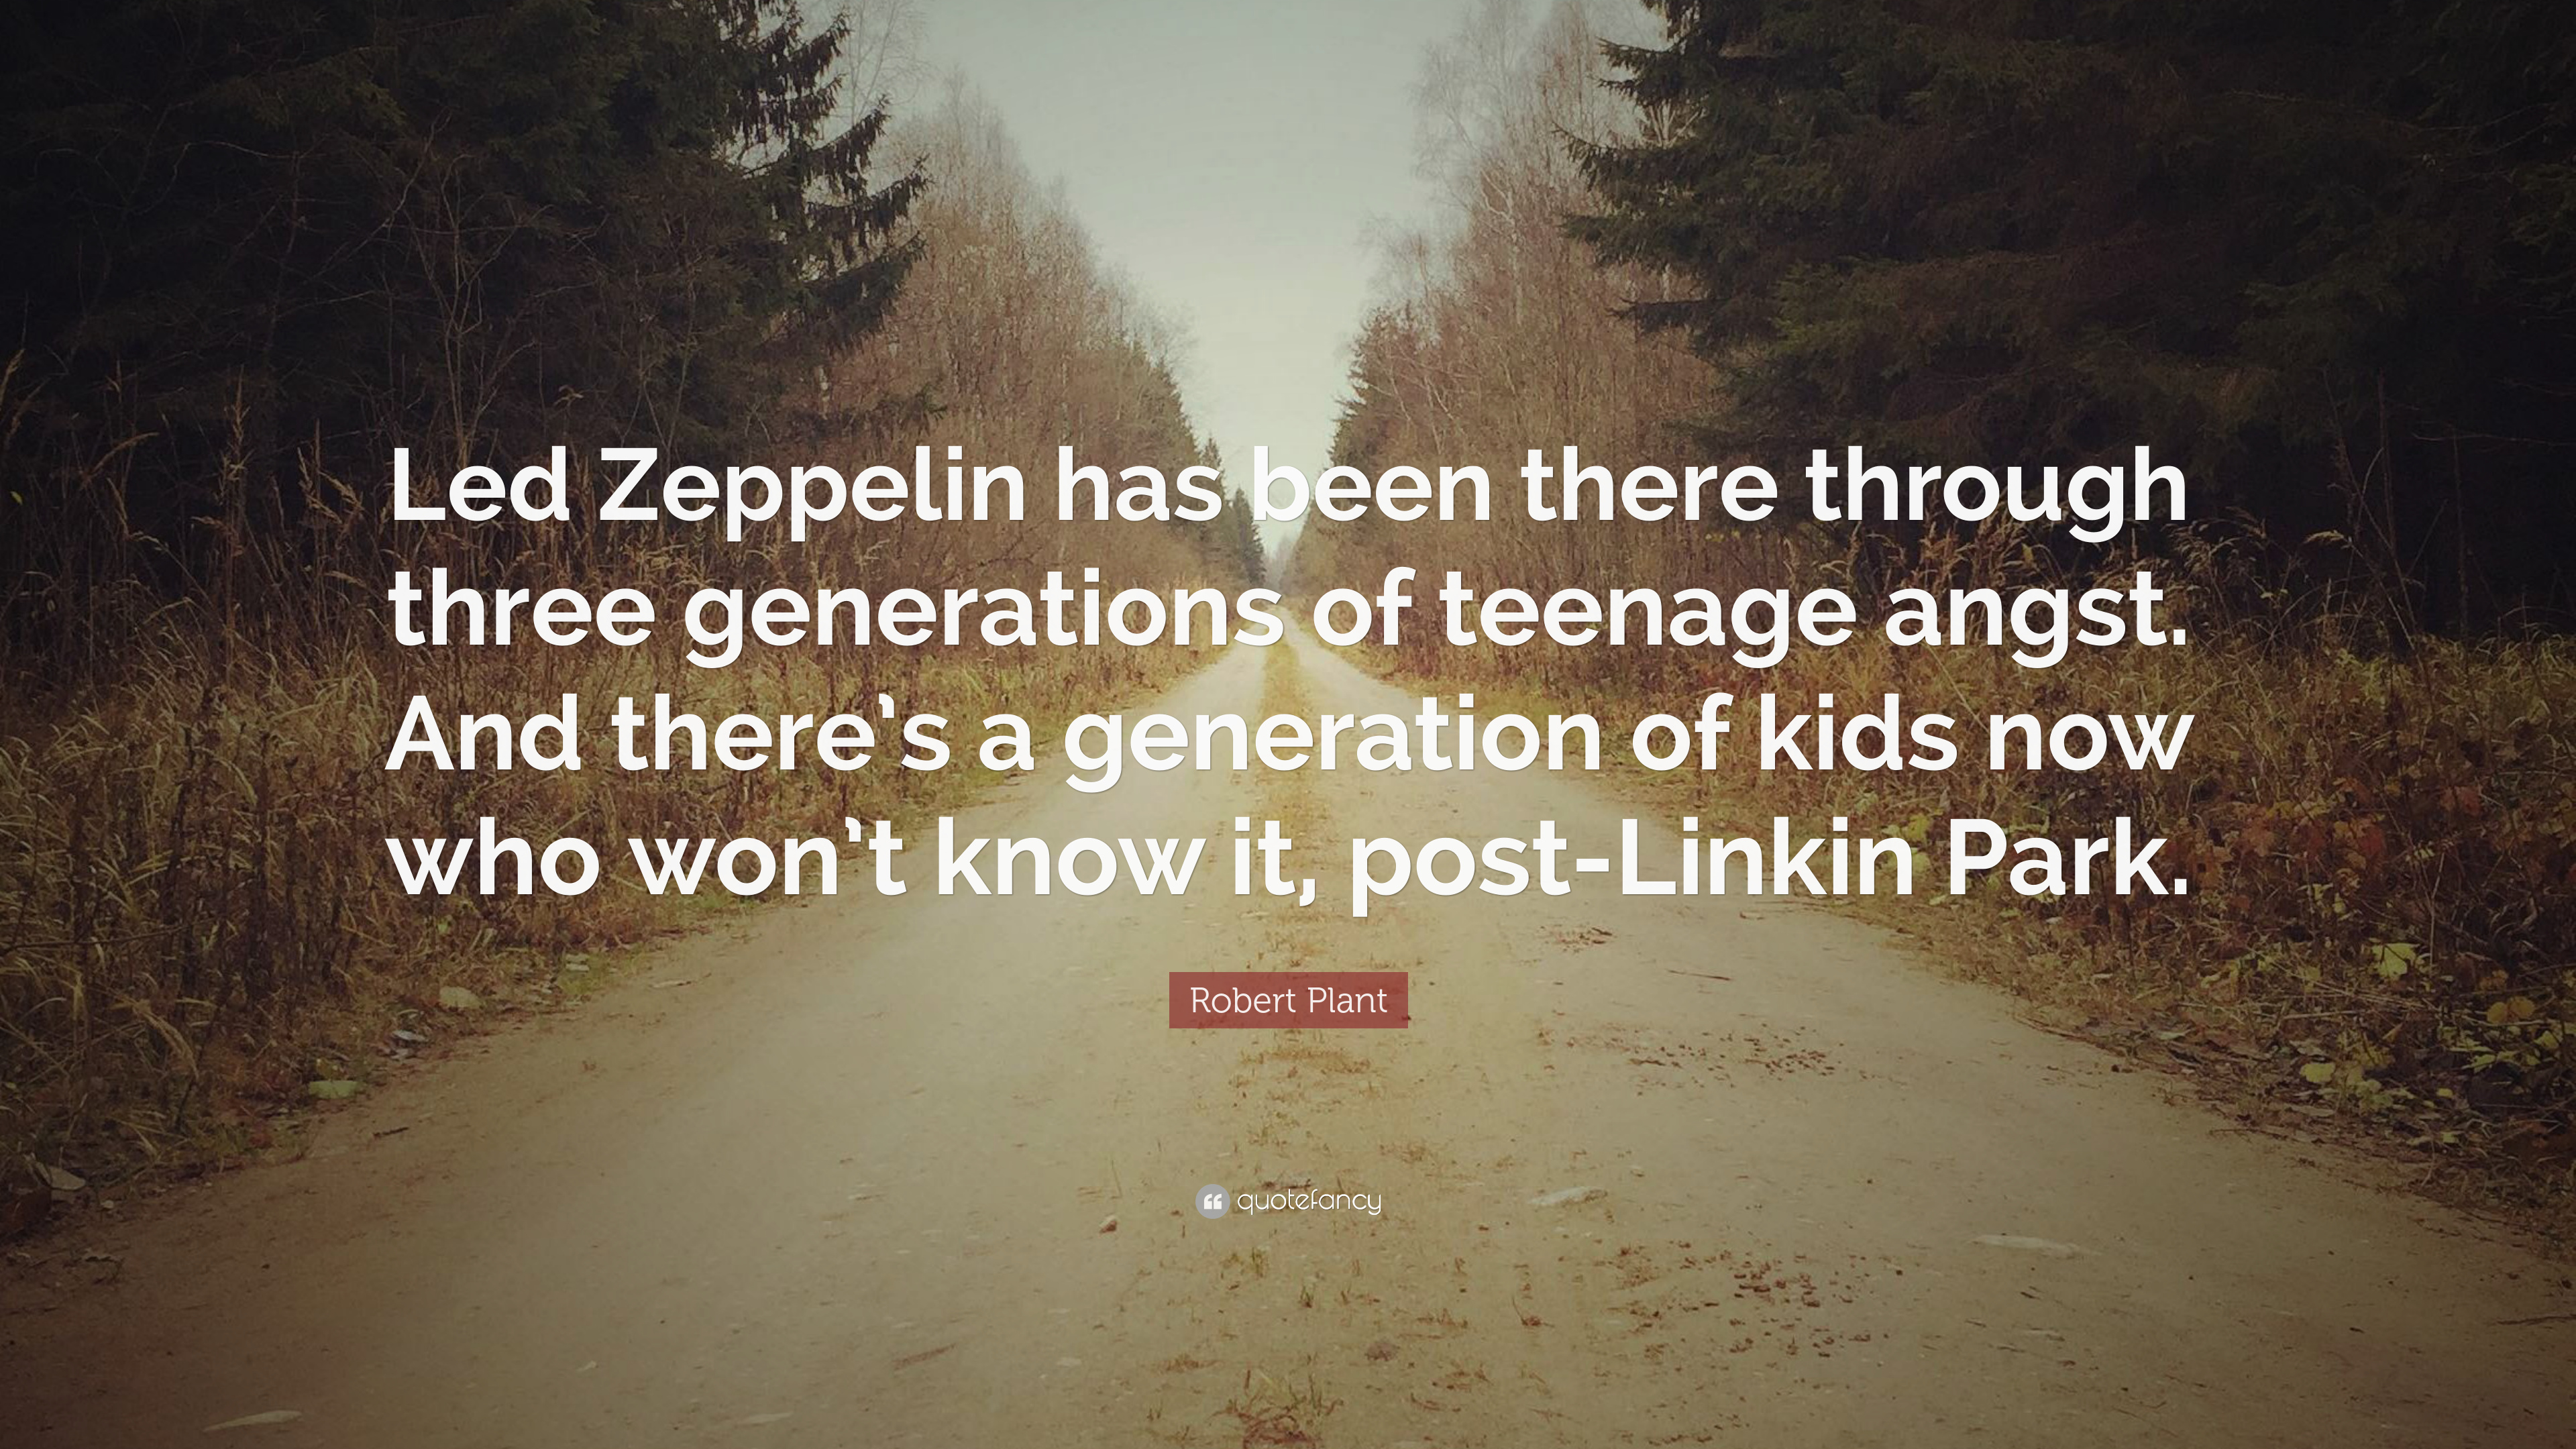 6 Robert Plant Quotes About Led Zeppelin